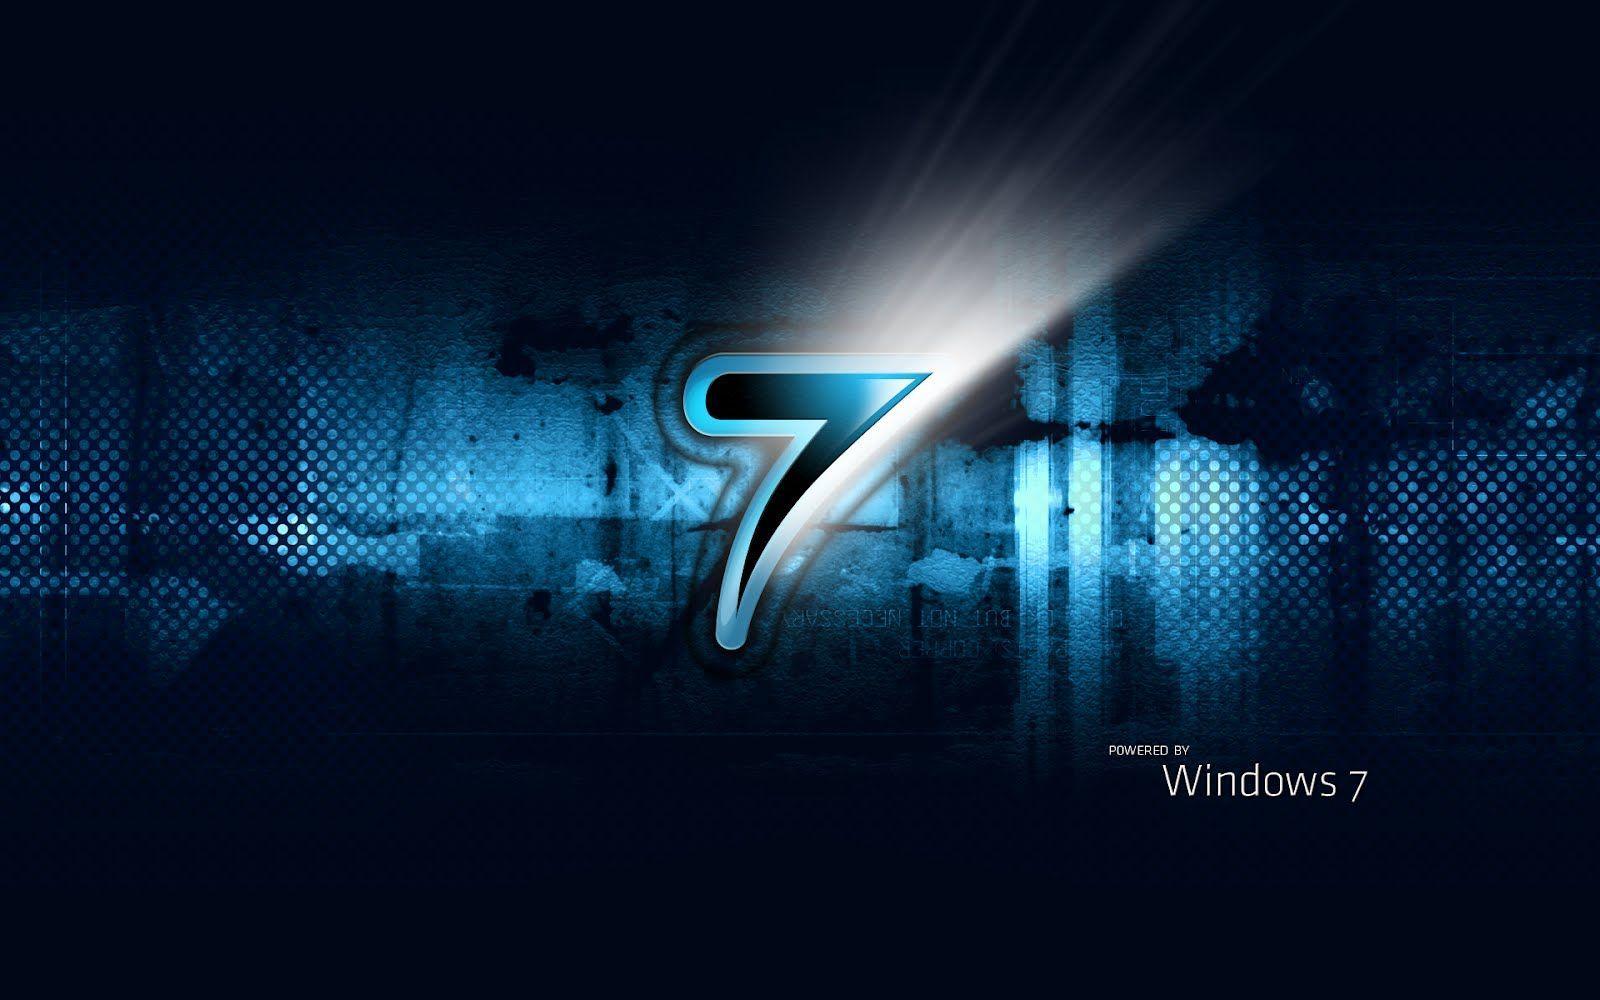 Awesome Wallpaper For Windows 7. Free Download Wallpaper